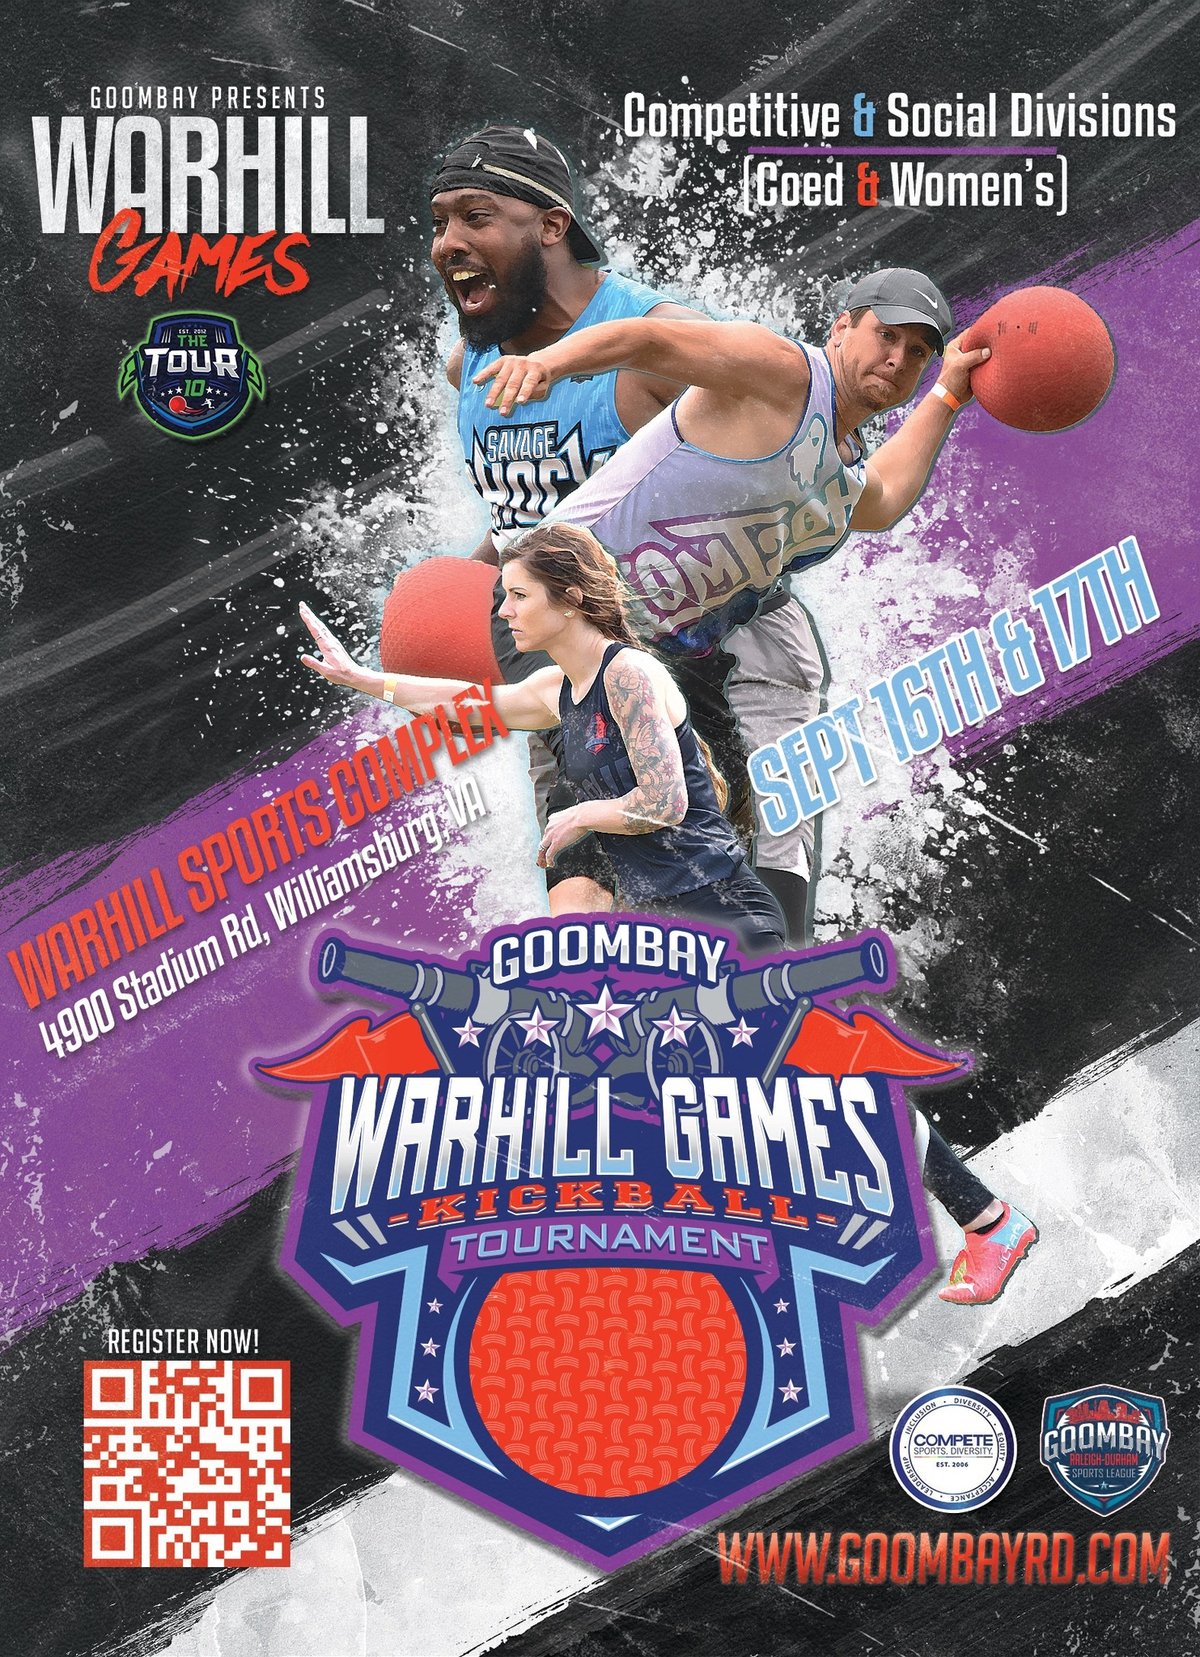 Join us for our National WarHill Games Kickball Tournament!